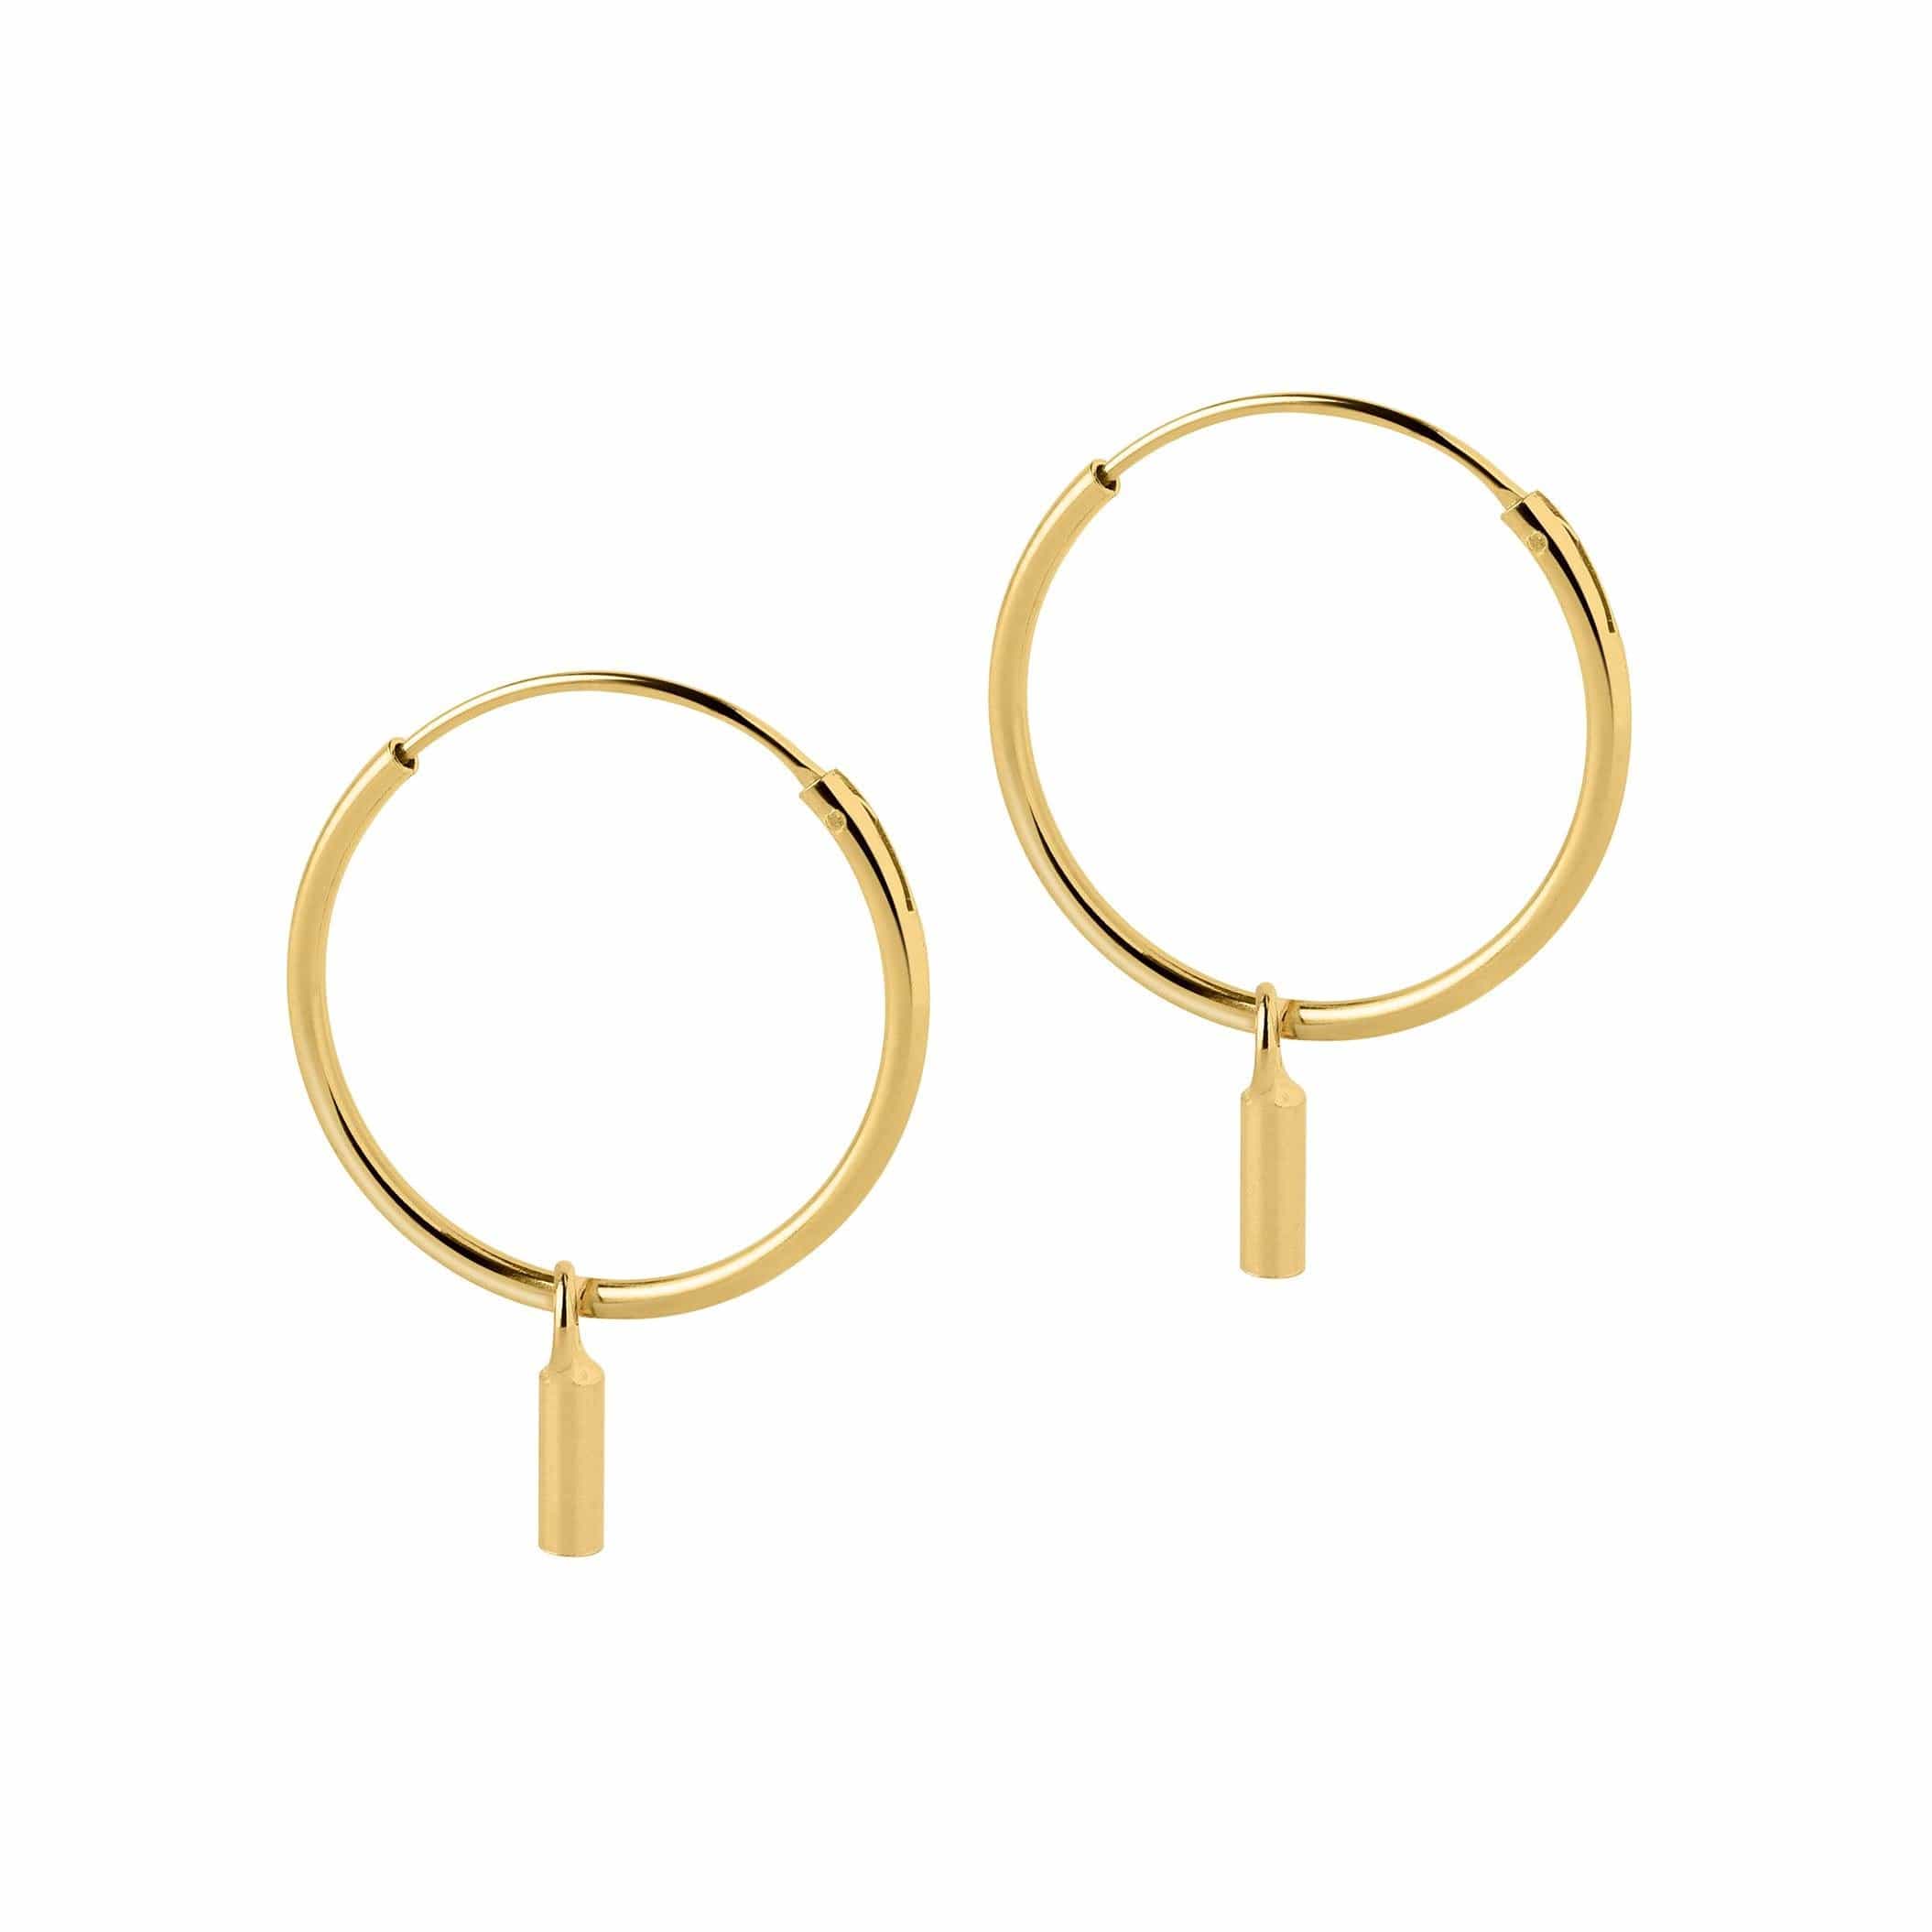 Hoop earrings gold plated with a rod pendant 18mm